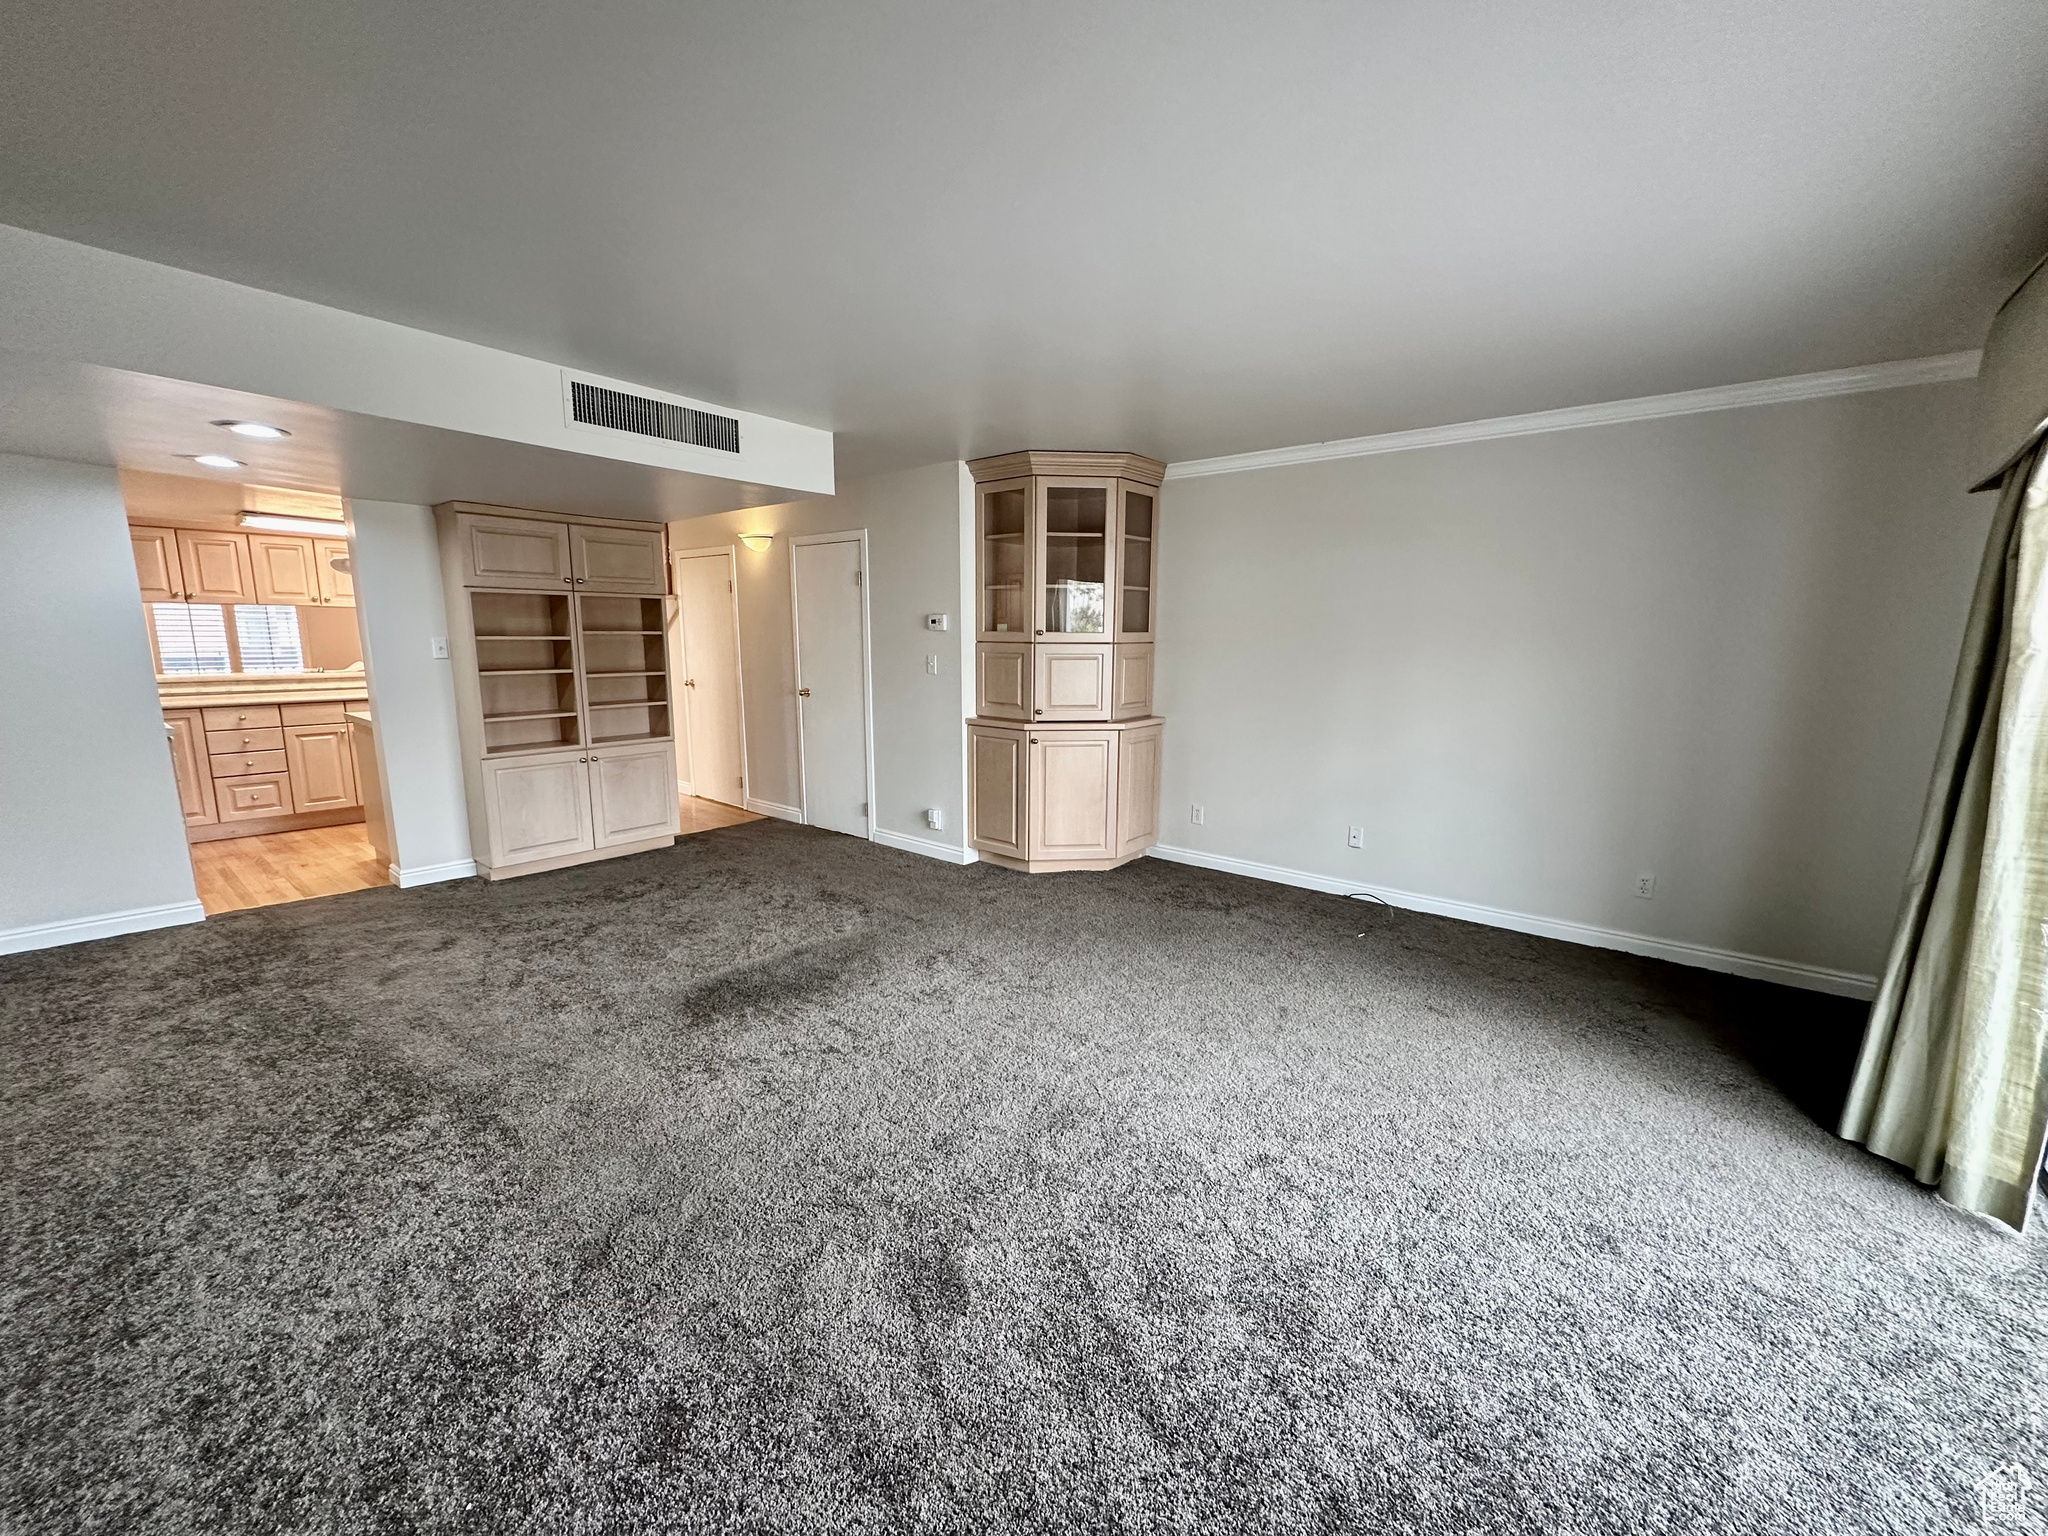 123 E 2ND #T5, Salt Lake City, Utah 84103, 2 Bedrooms Bedrooms, 11 Rooms Rooms,1 BathroomBathrooms,Residential,For sale,2ND,1895258